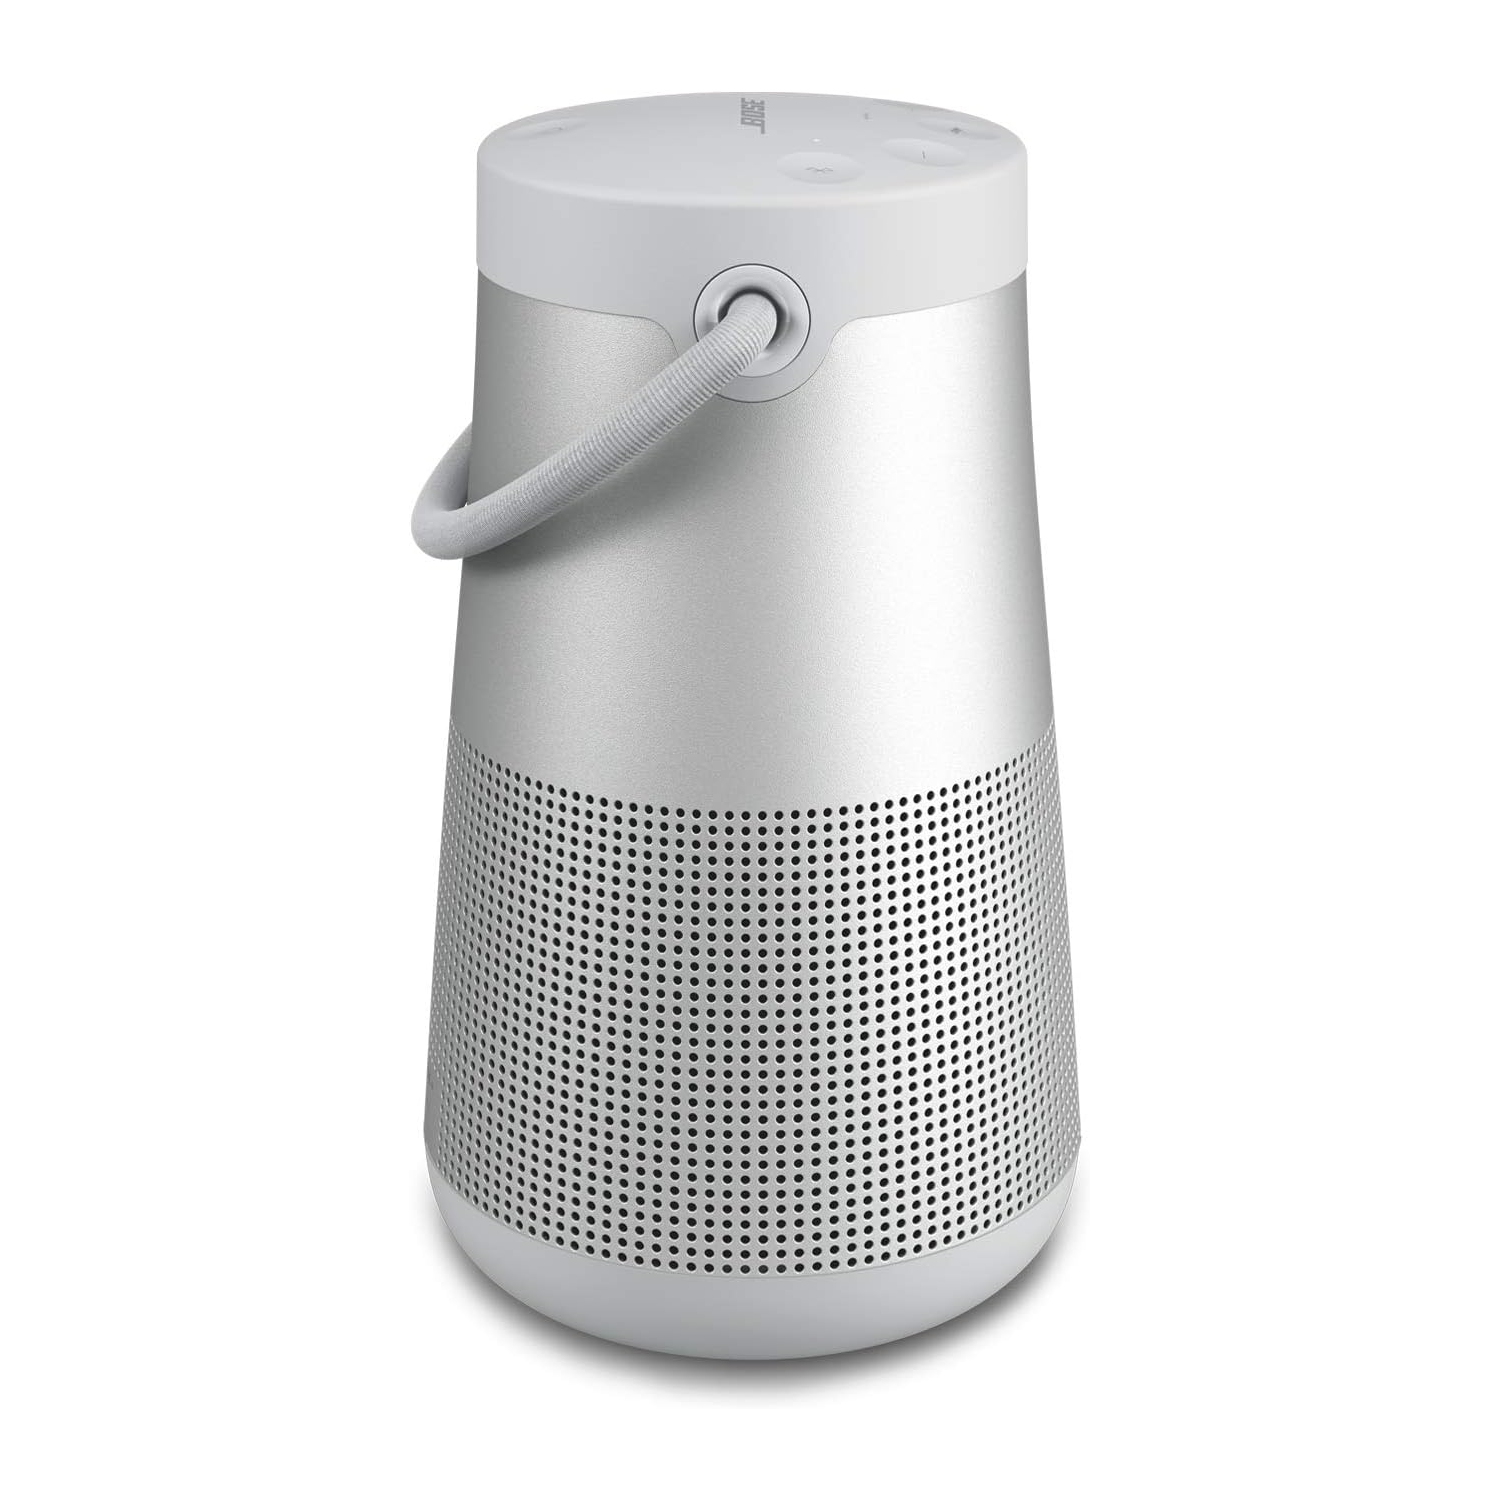 Bose SoundLink Revolve+ (Series II) Portable Bluetooth Speaker - Wireless Water-Resistant Speaker with Long-Lasting Battery and Handle, Silver